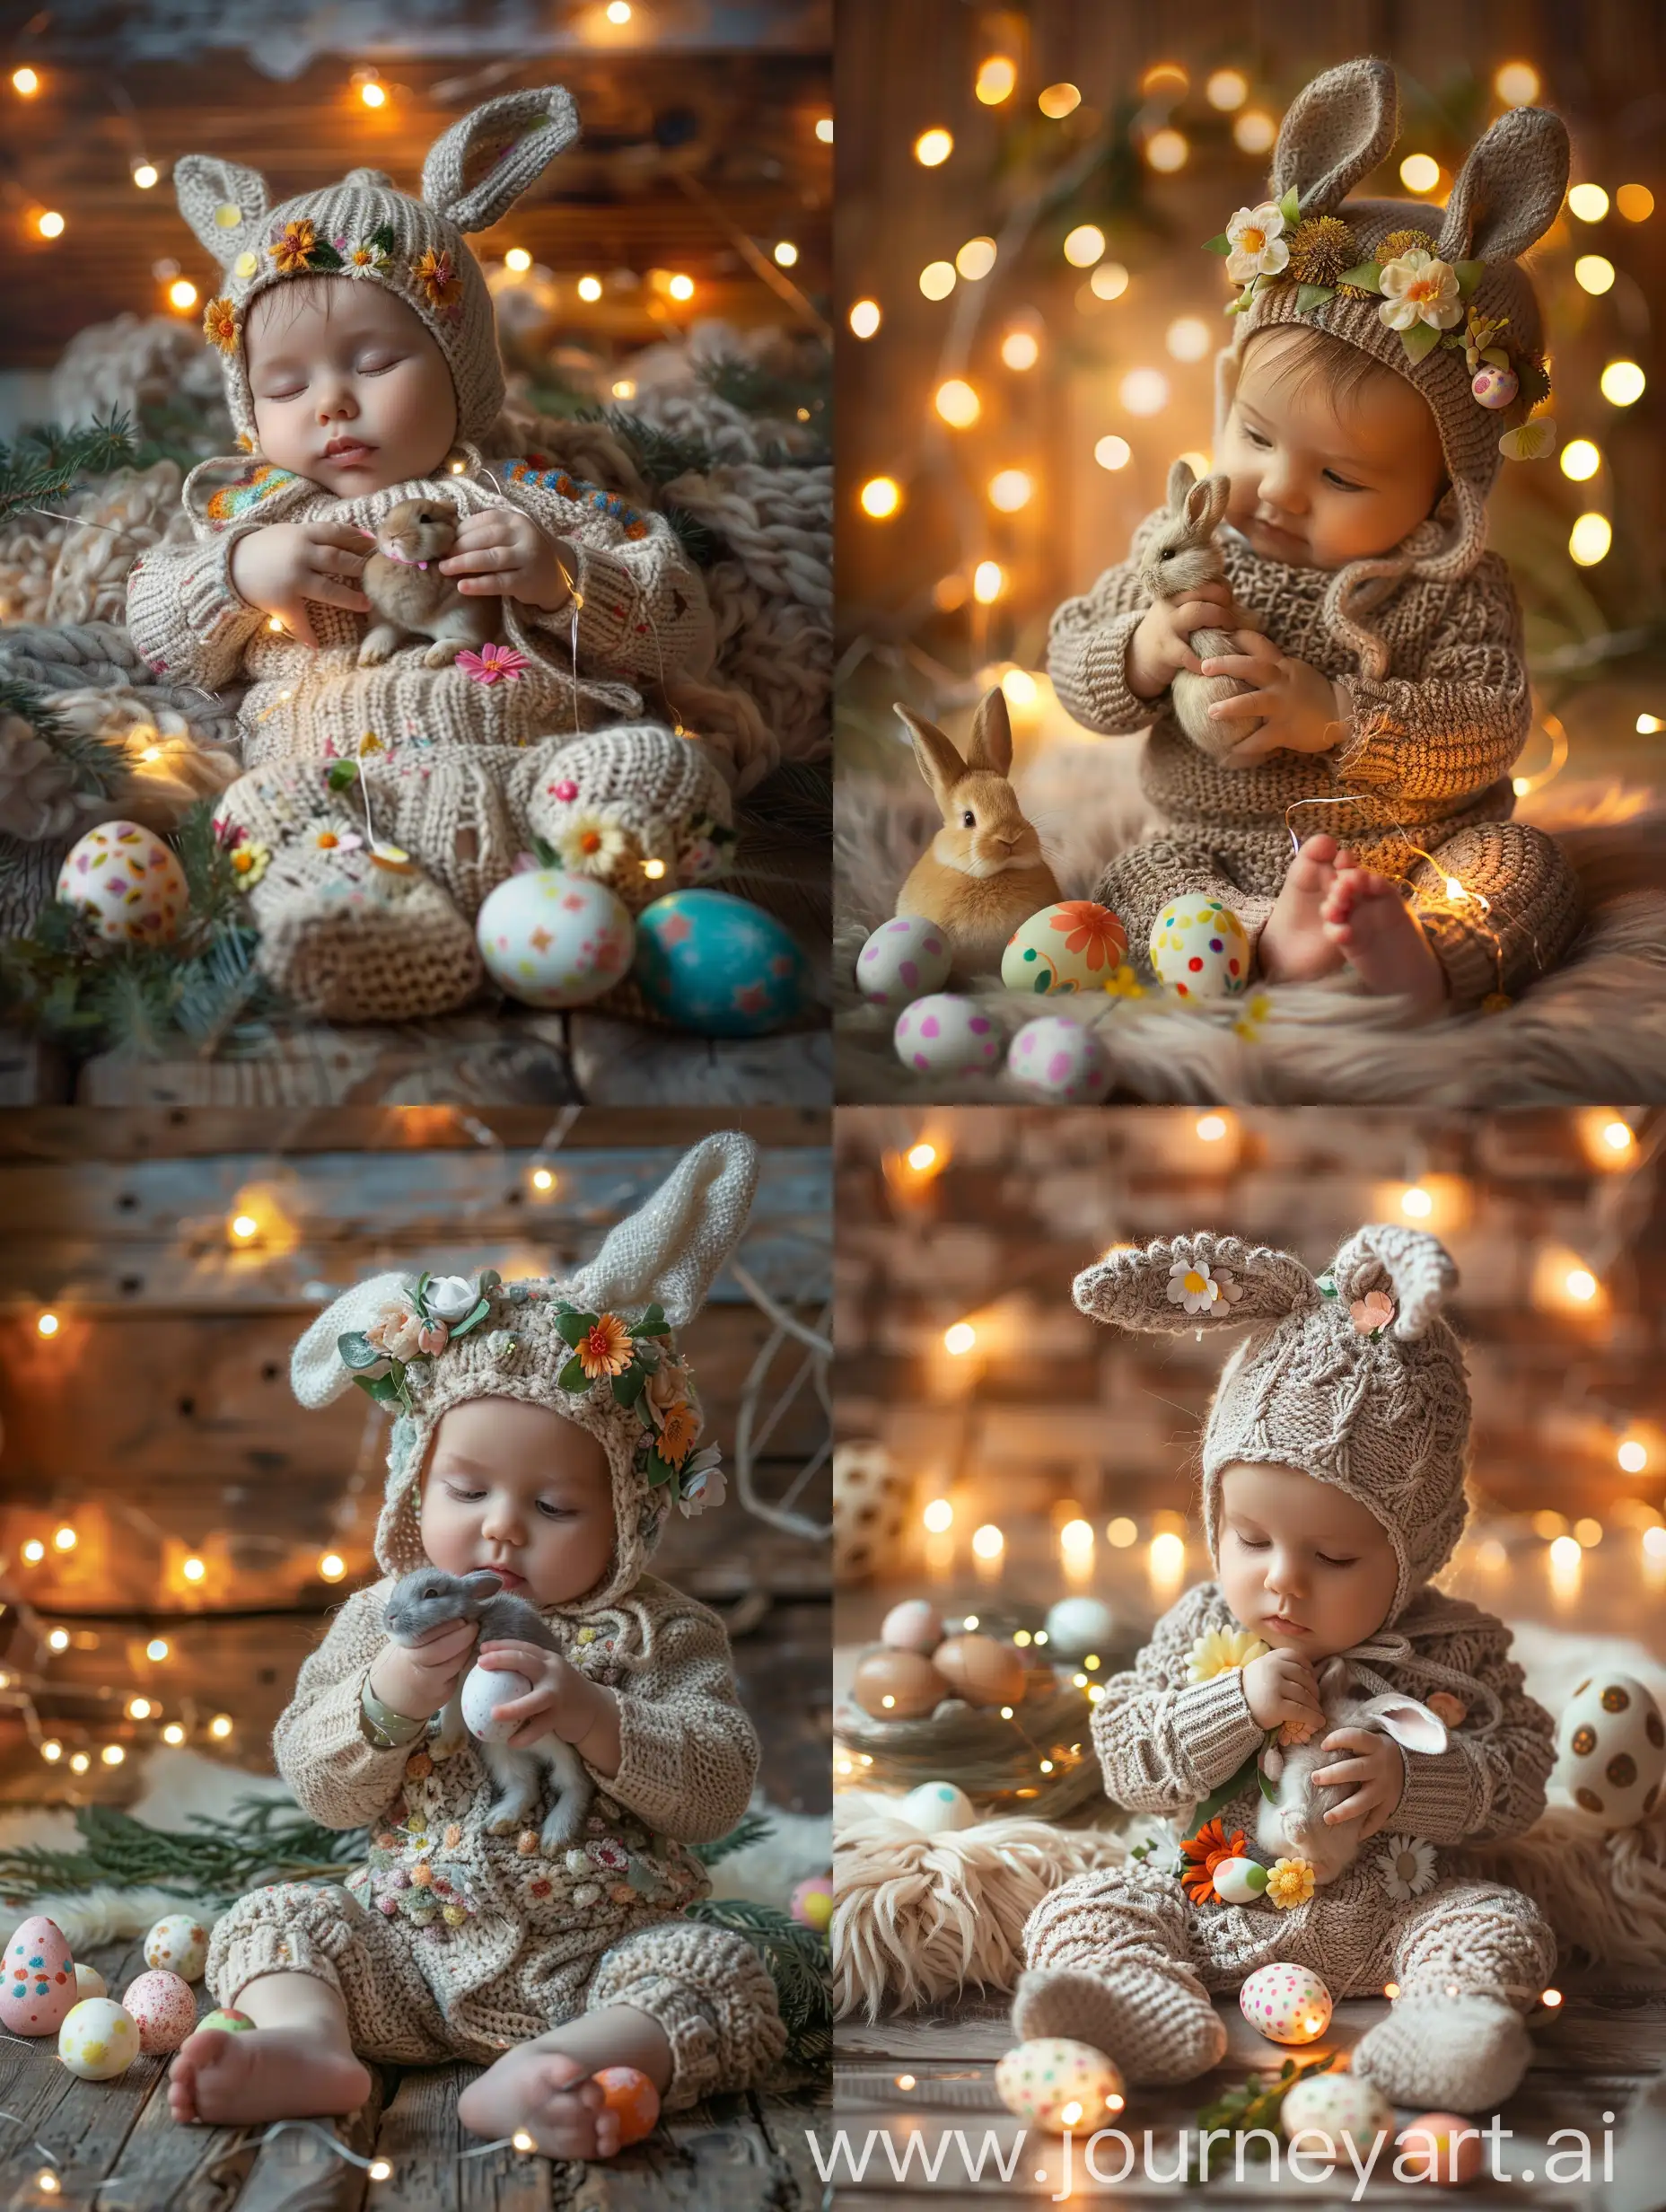 An infant is an infant in a knitted suit with bunny ears and flowers holding a small rabbit, Easter eggs are lying next to it, lights are burning on the background